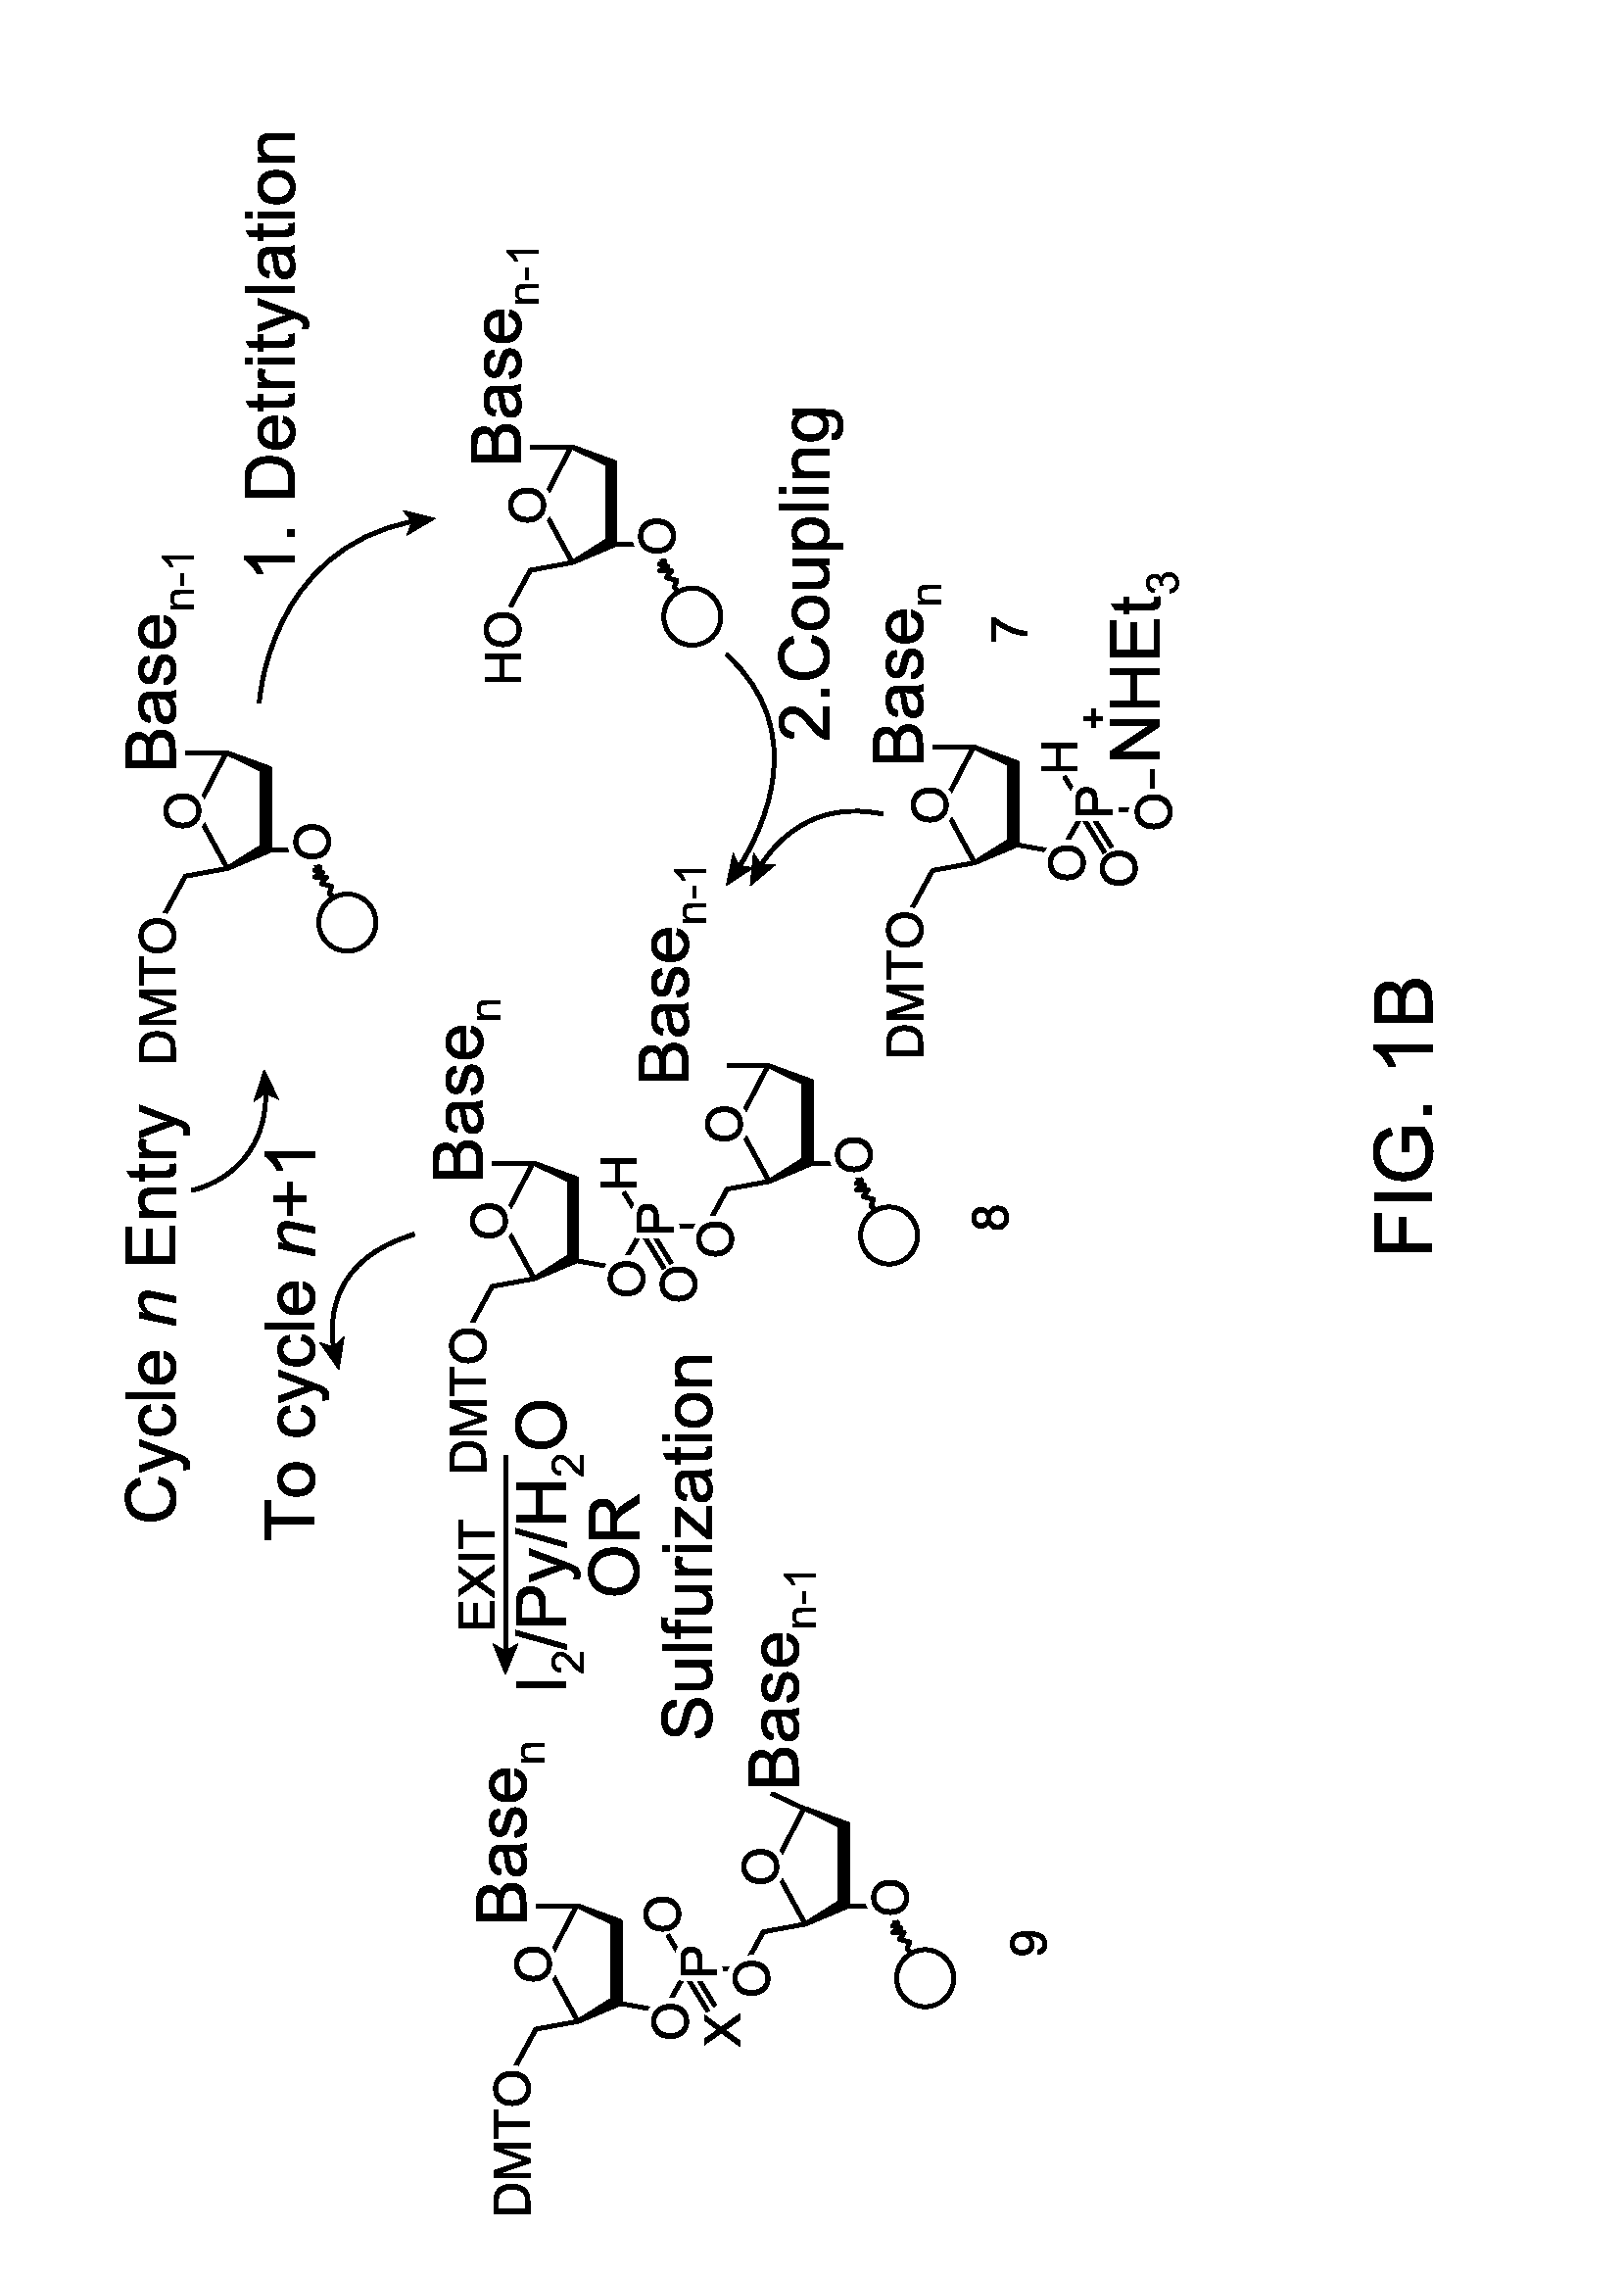 Novel methods for the synthesis and purification of oligomers